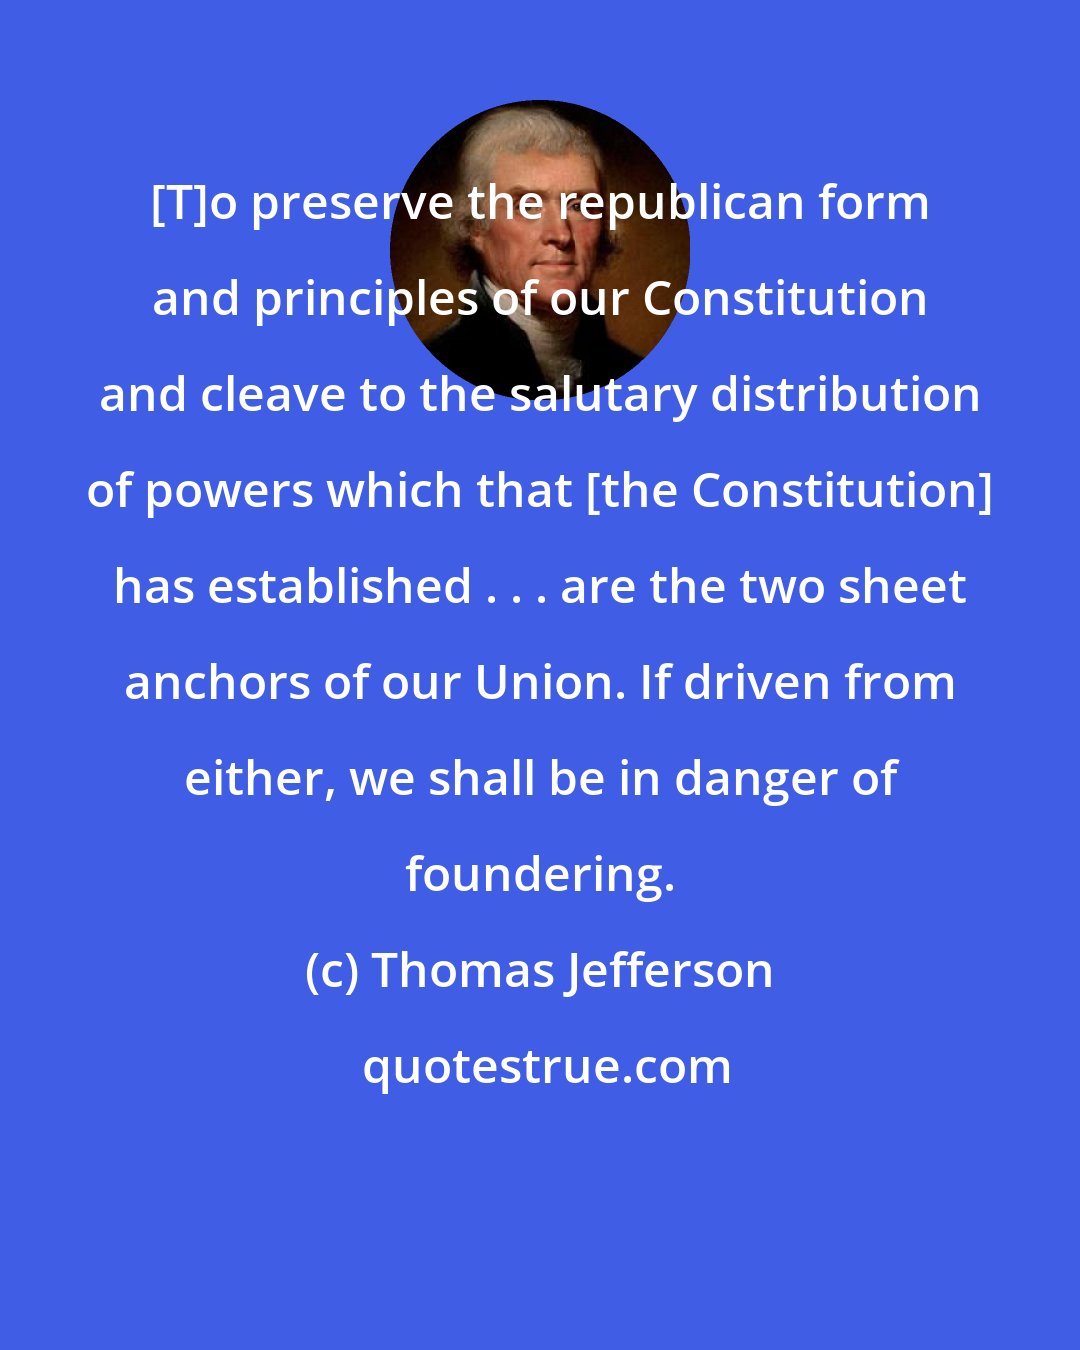 Thomas Jefferson: [T]o preserve the republican form and principles of our Constitution and cleave to the salutary distribution of powers which that [the Constitution] has established . . . are the two sheet anchors of our Union. If driven from either, we shall be in danger of foundering.